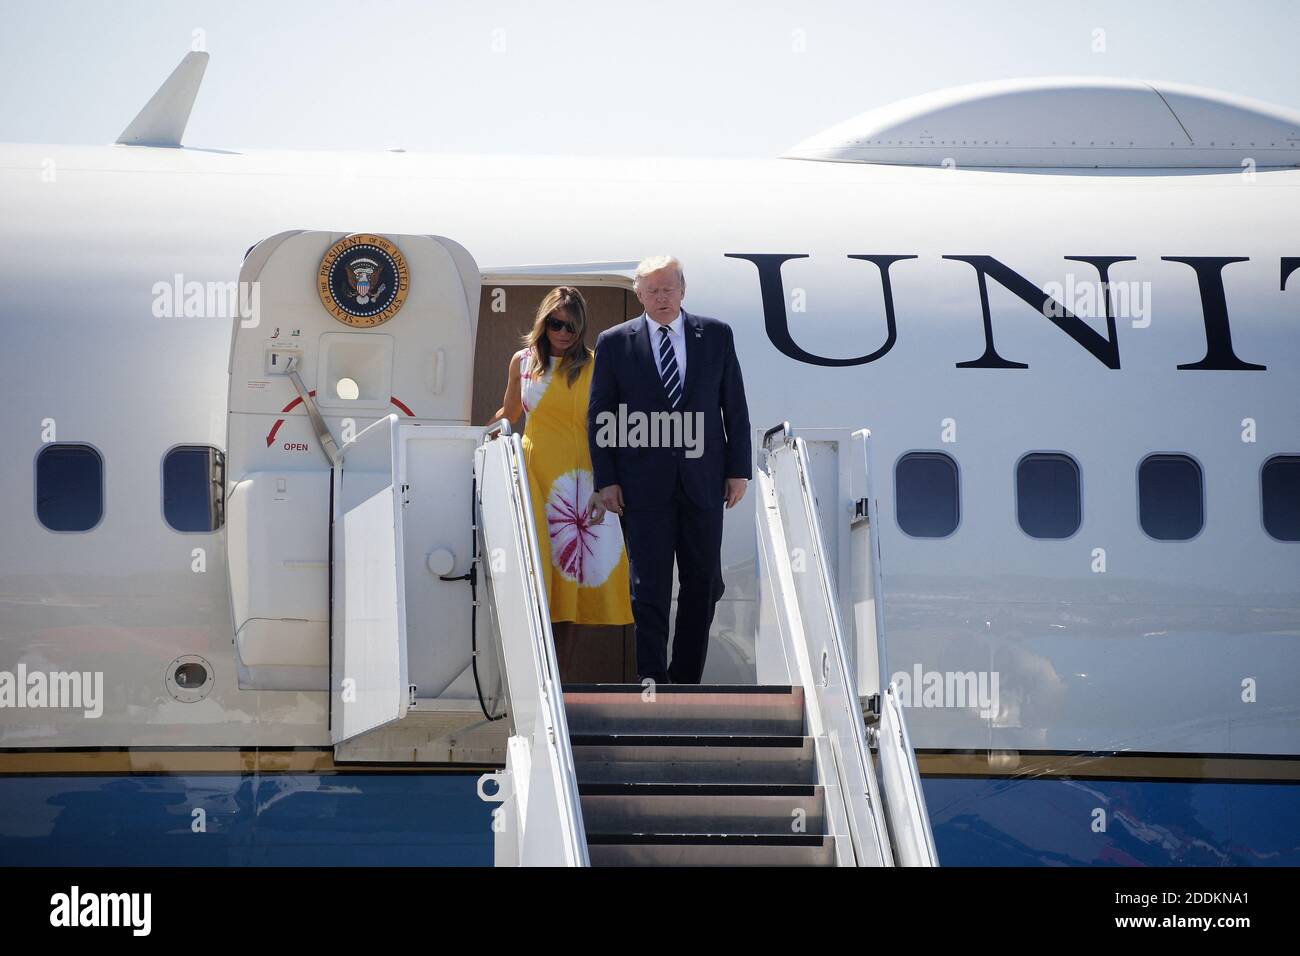 The President of United States, Donald Trump and his wife Melania Trump  arrives in Bordeaux, France for the G7 Summit on Friday, August 24, 2019.  Photo by Thibaud Moritz/ABACAPRESS.COM Stock Photo -